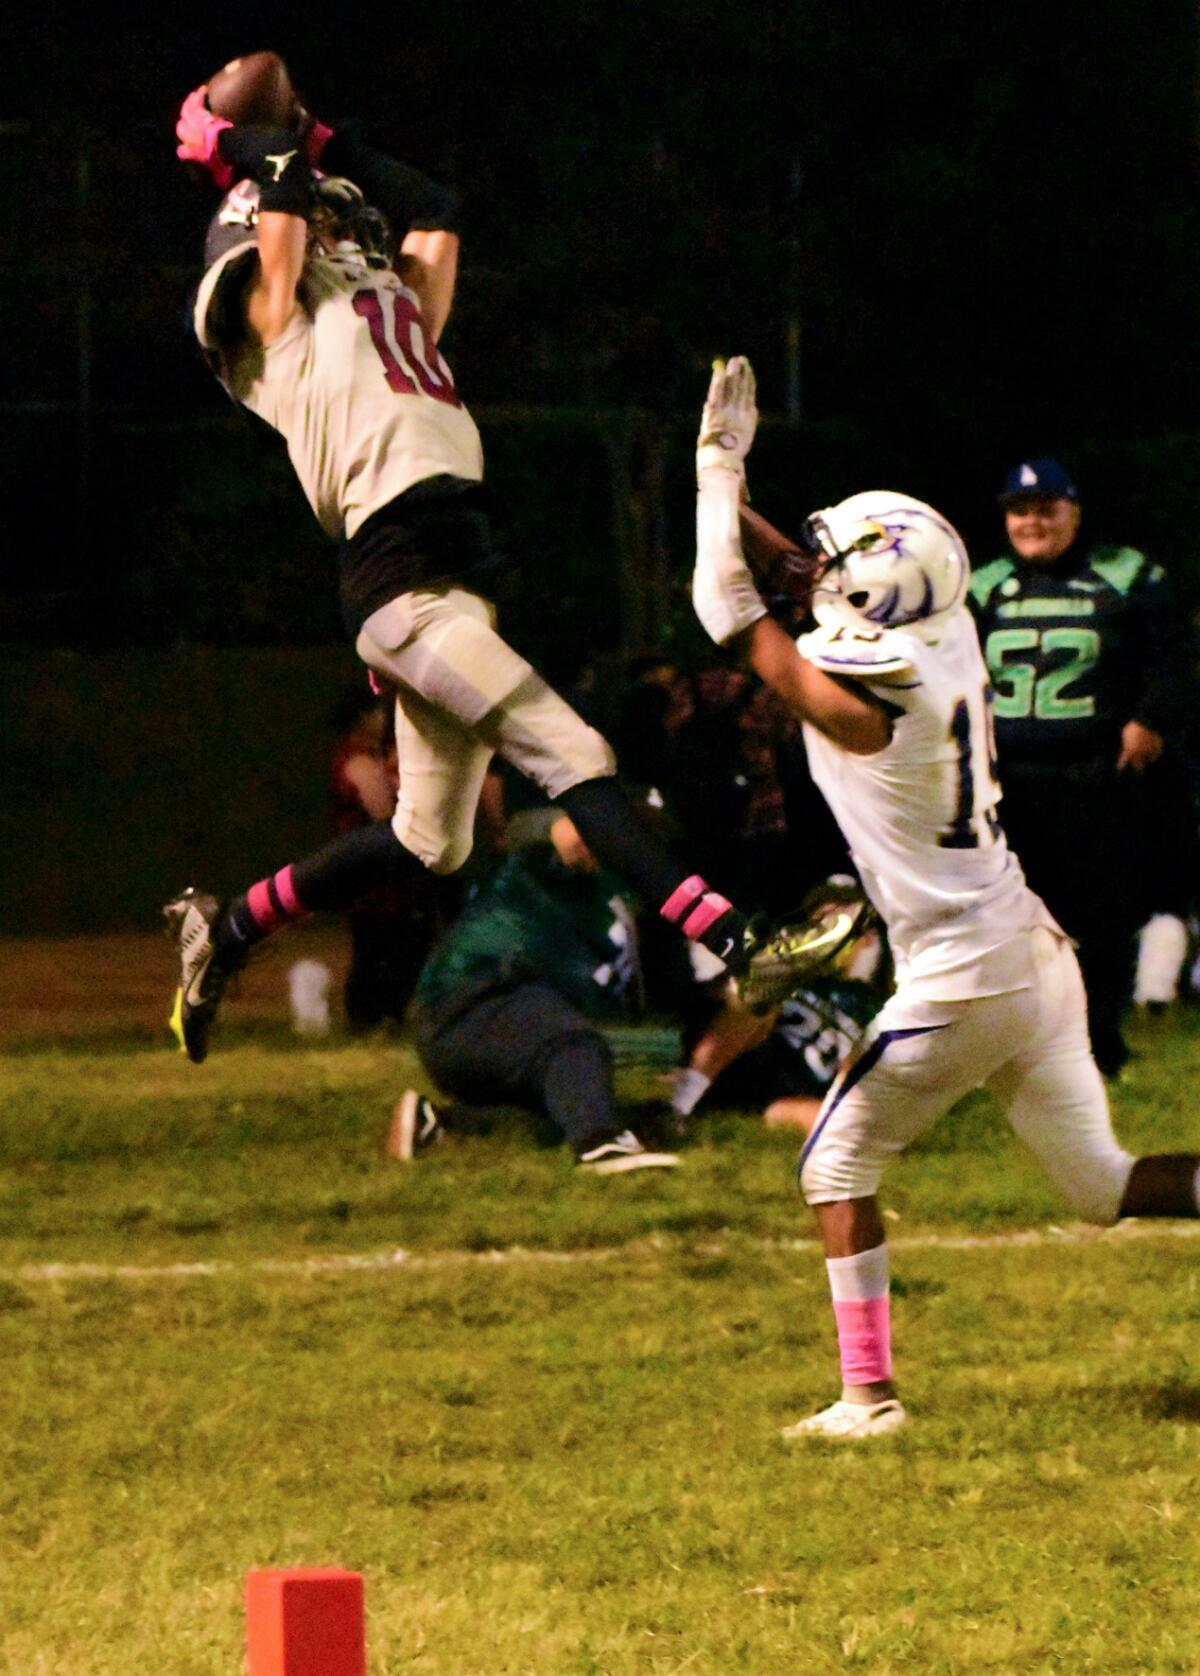 Garfield High's Jayden Barnes leaps high above a defender to make a catch.